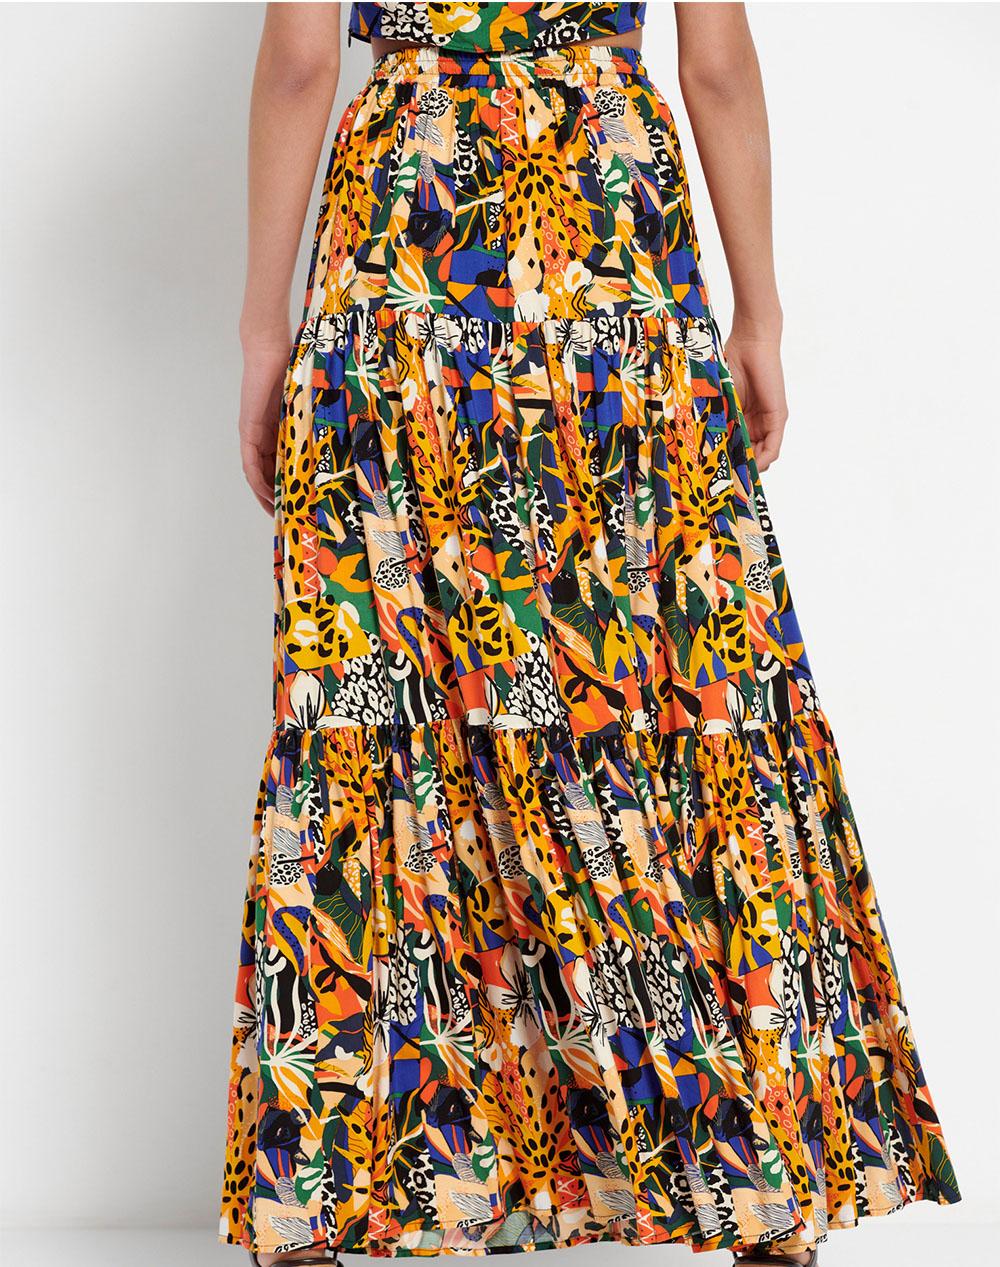 All over printed maxi skirt with elasticated waist